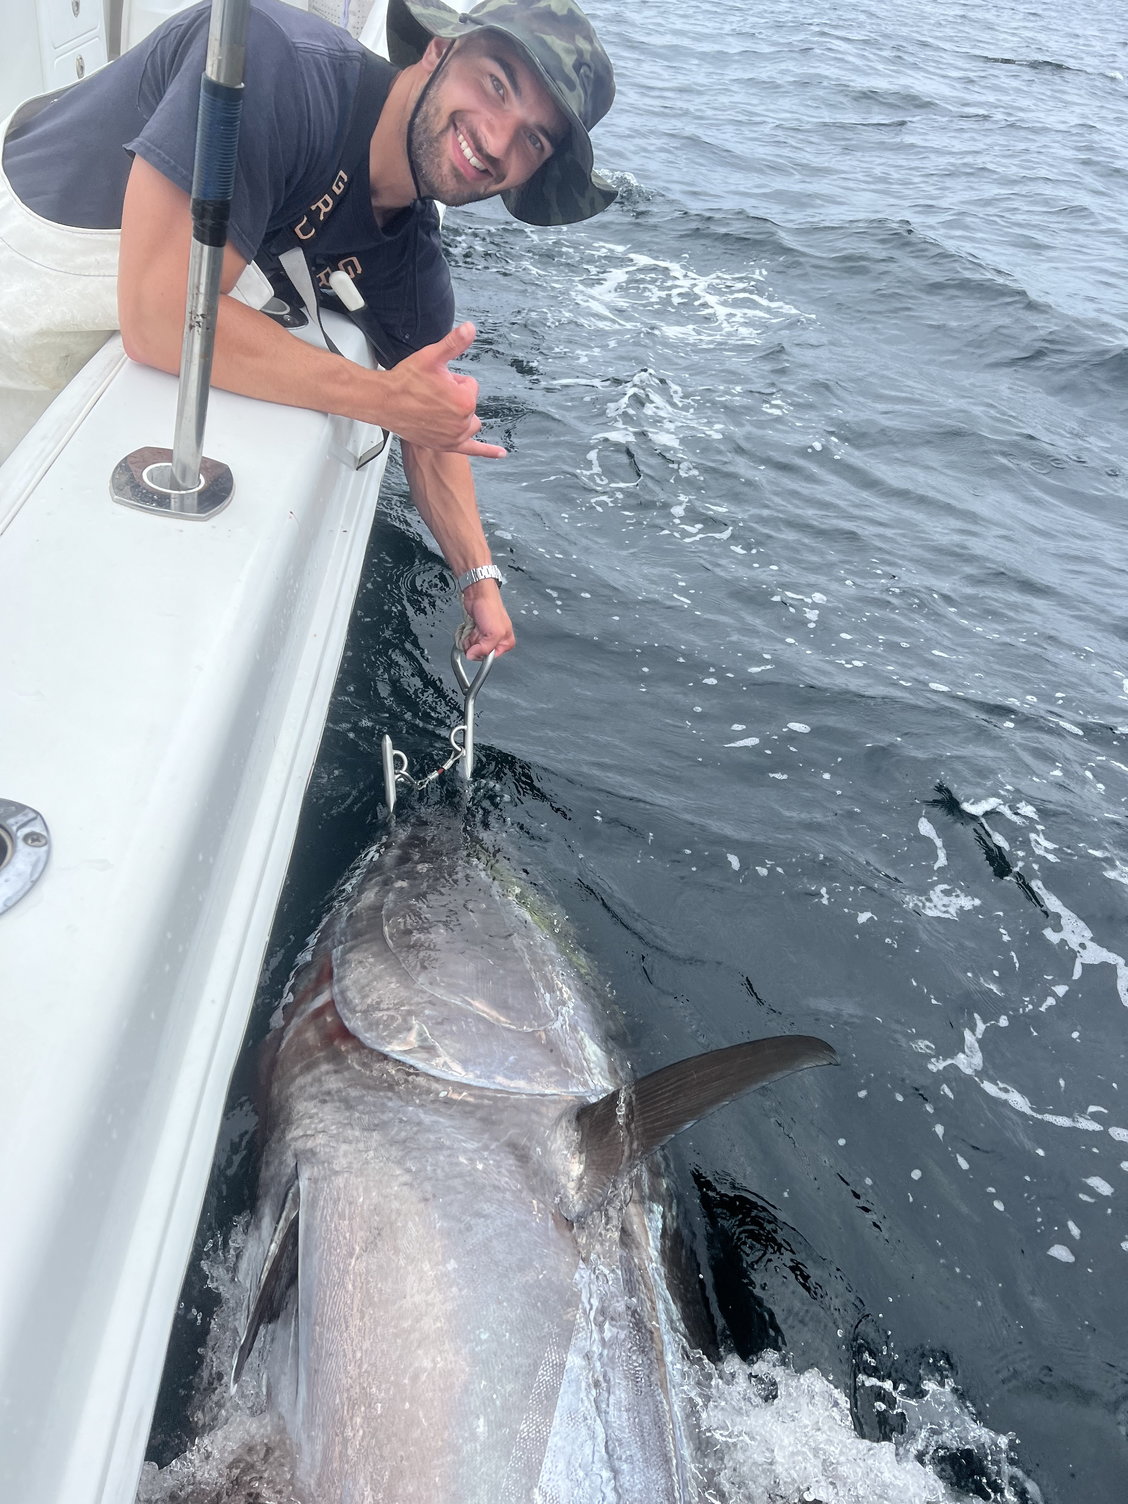 Tuna off Chatham - Page 12 - The Hull Truth - Boating and Fishing Forum